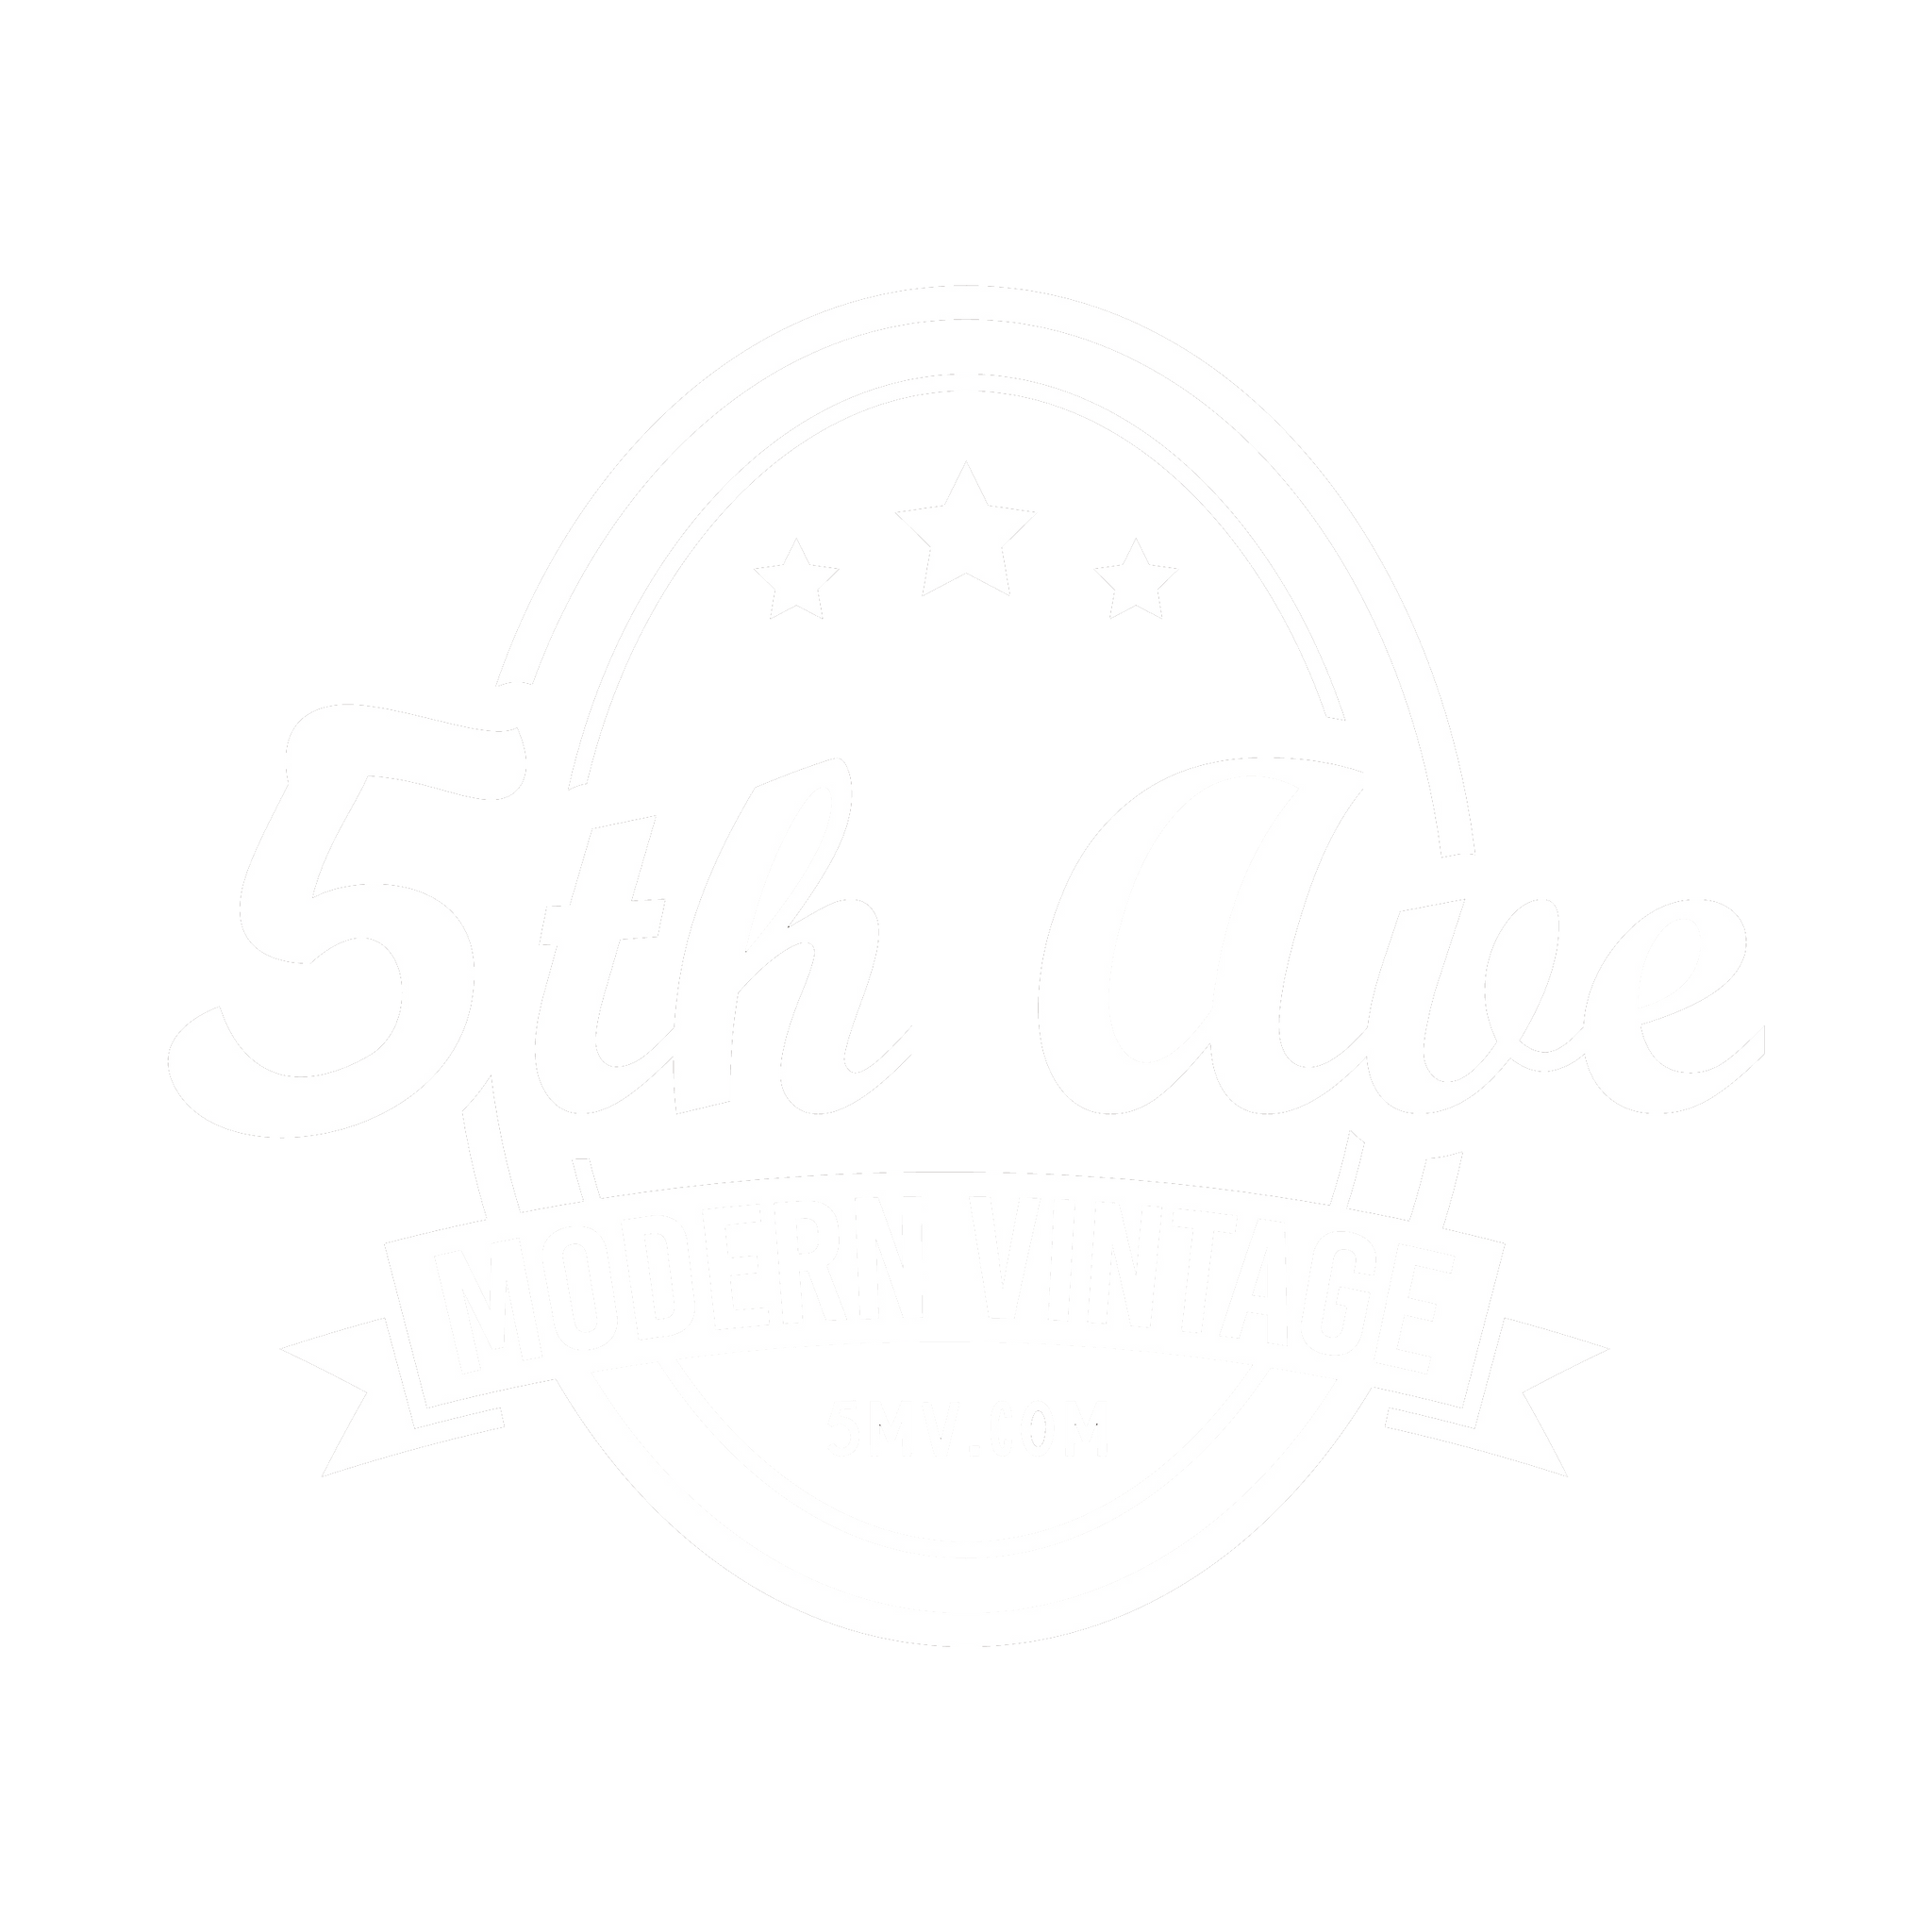 5th Ave Modern Vintage: Where You Learn About T-Shirts and More